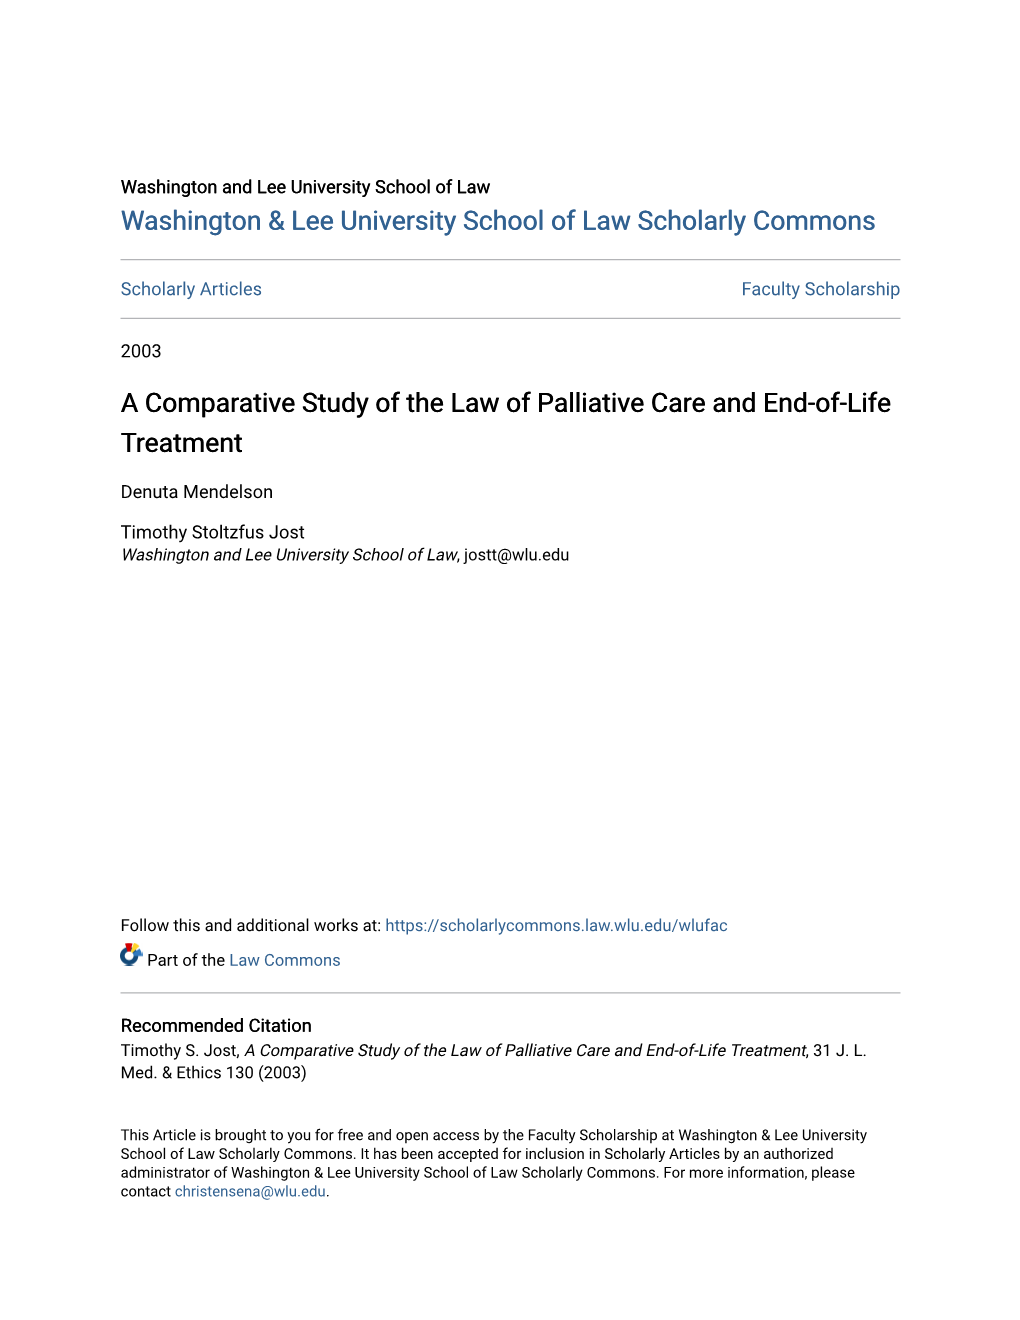 A Comparative Study of the Law of Palliative Care and End-Of-Life Treatment